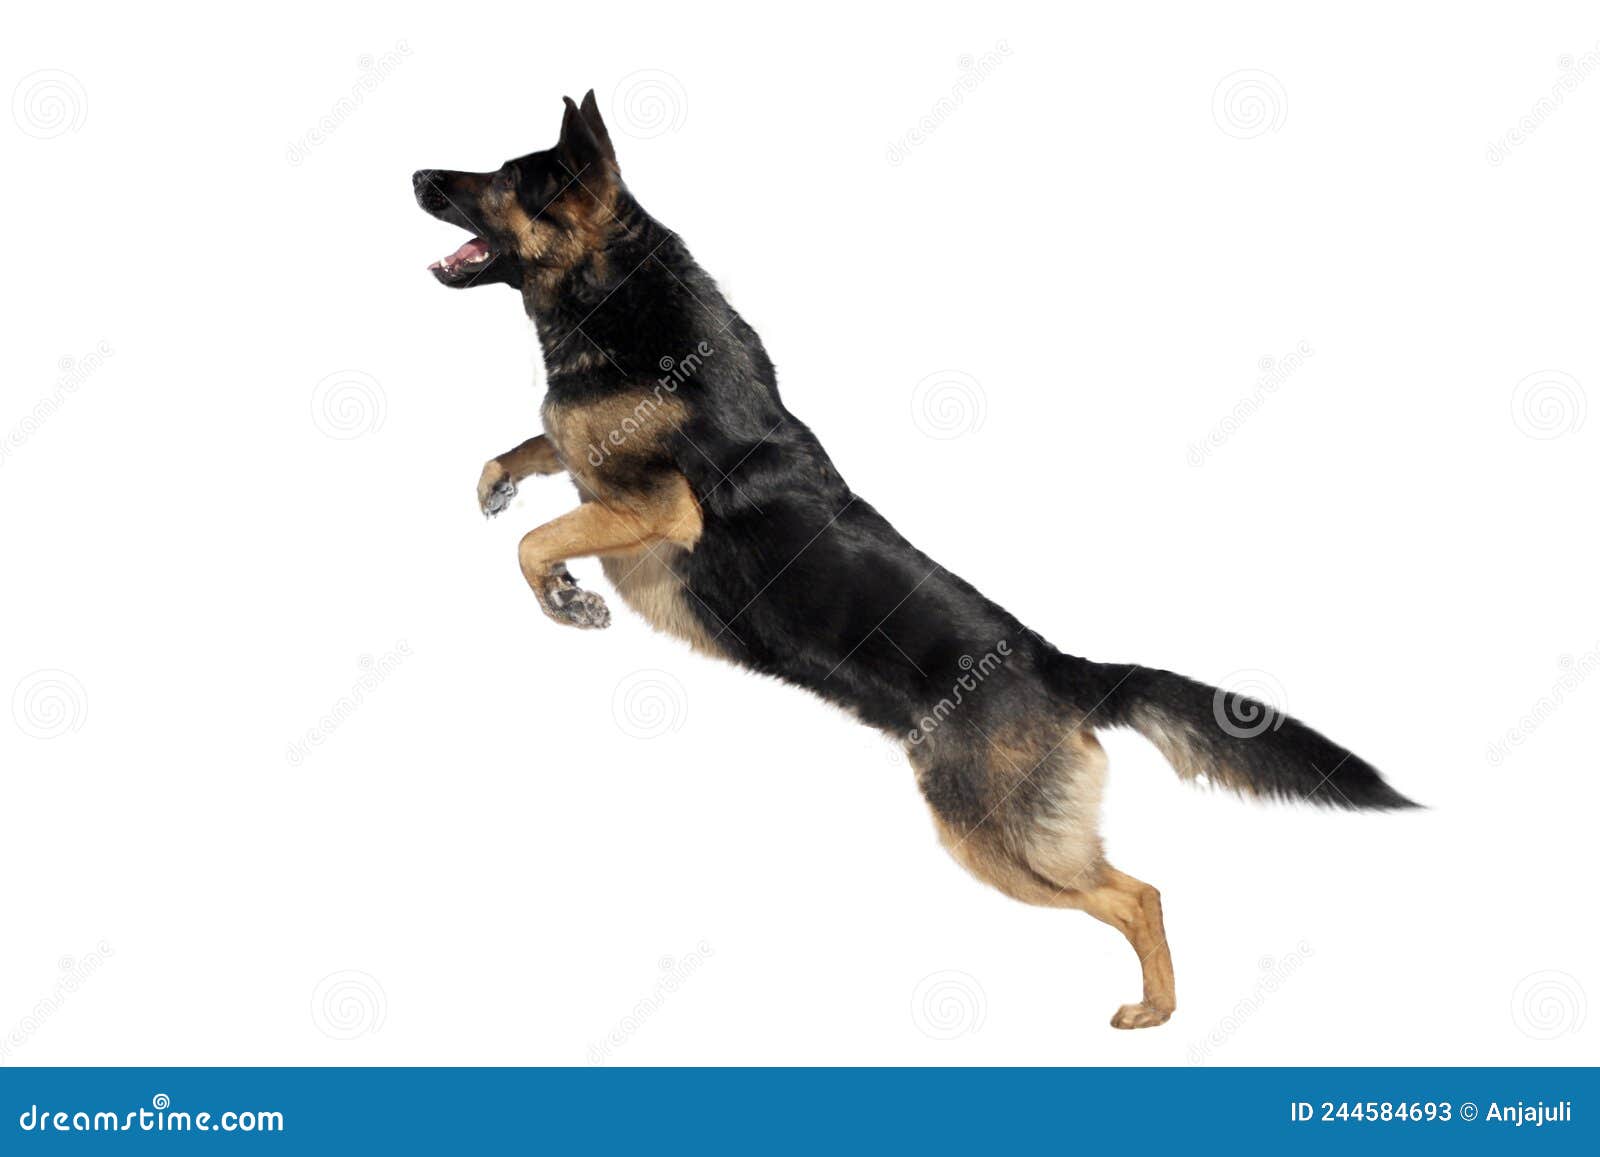 German Shepherd Dog Jumping. Dog Play and Jump To Catch a Toy with ...